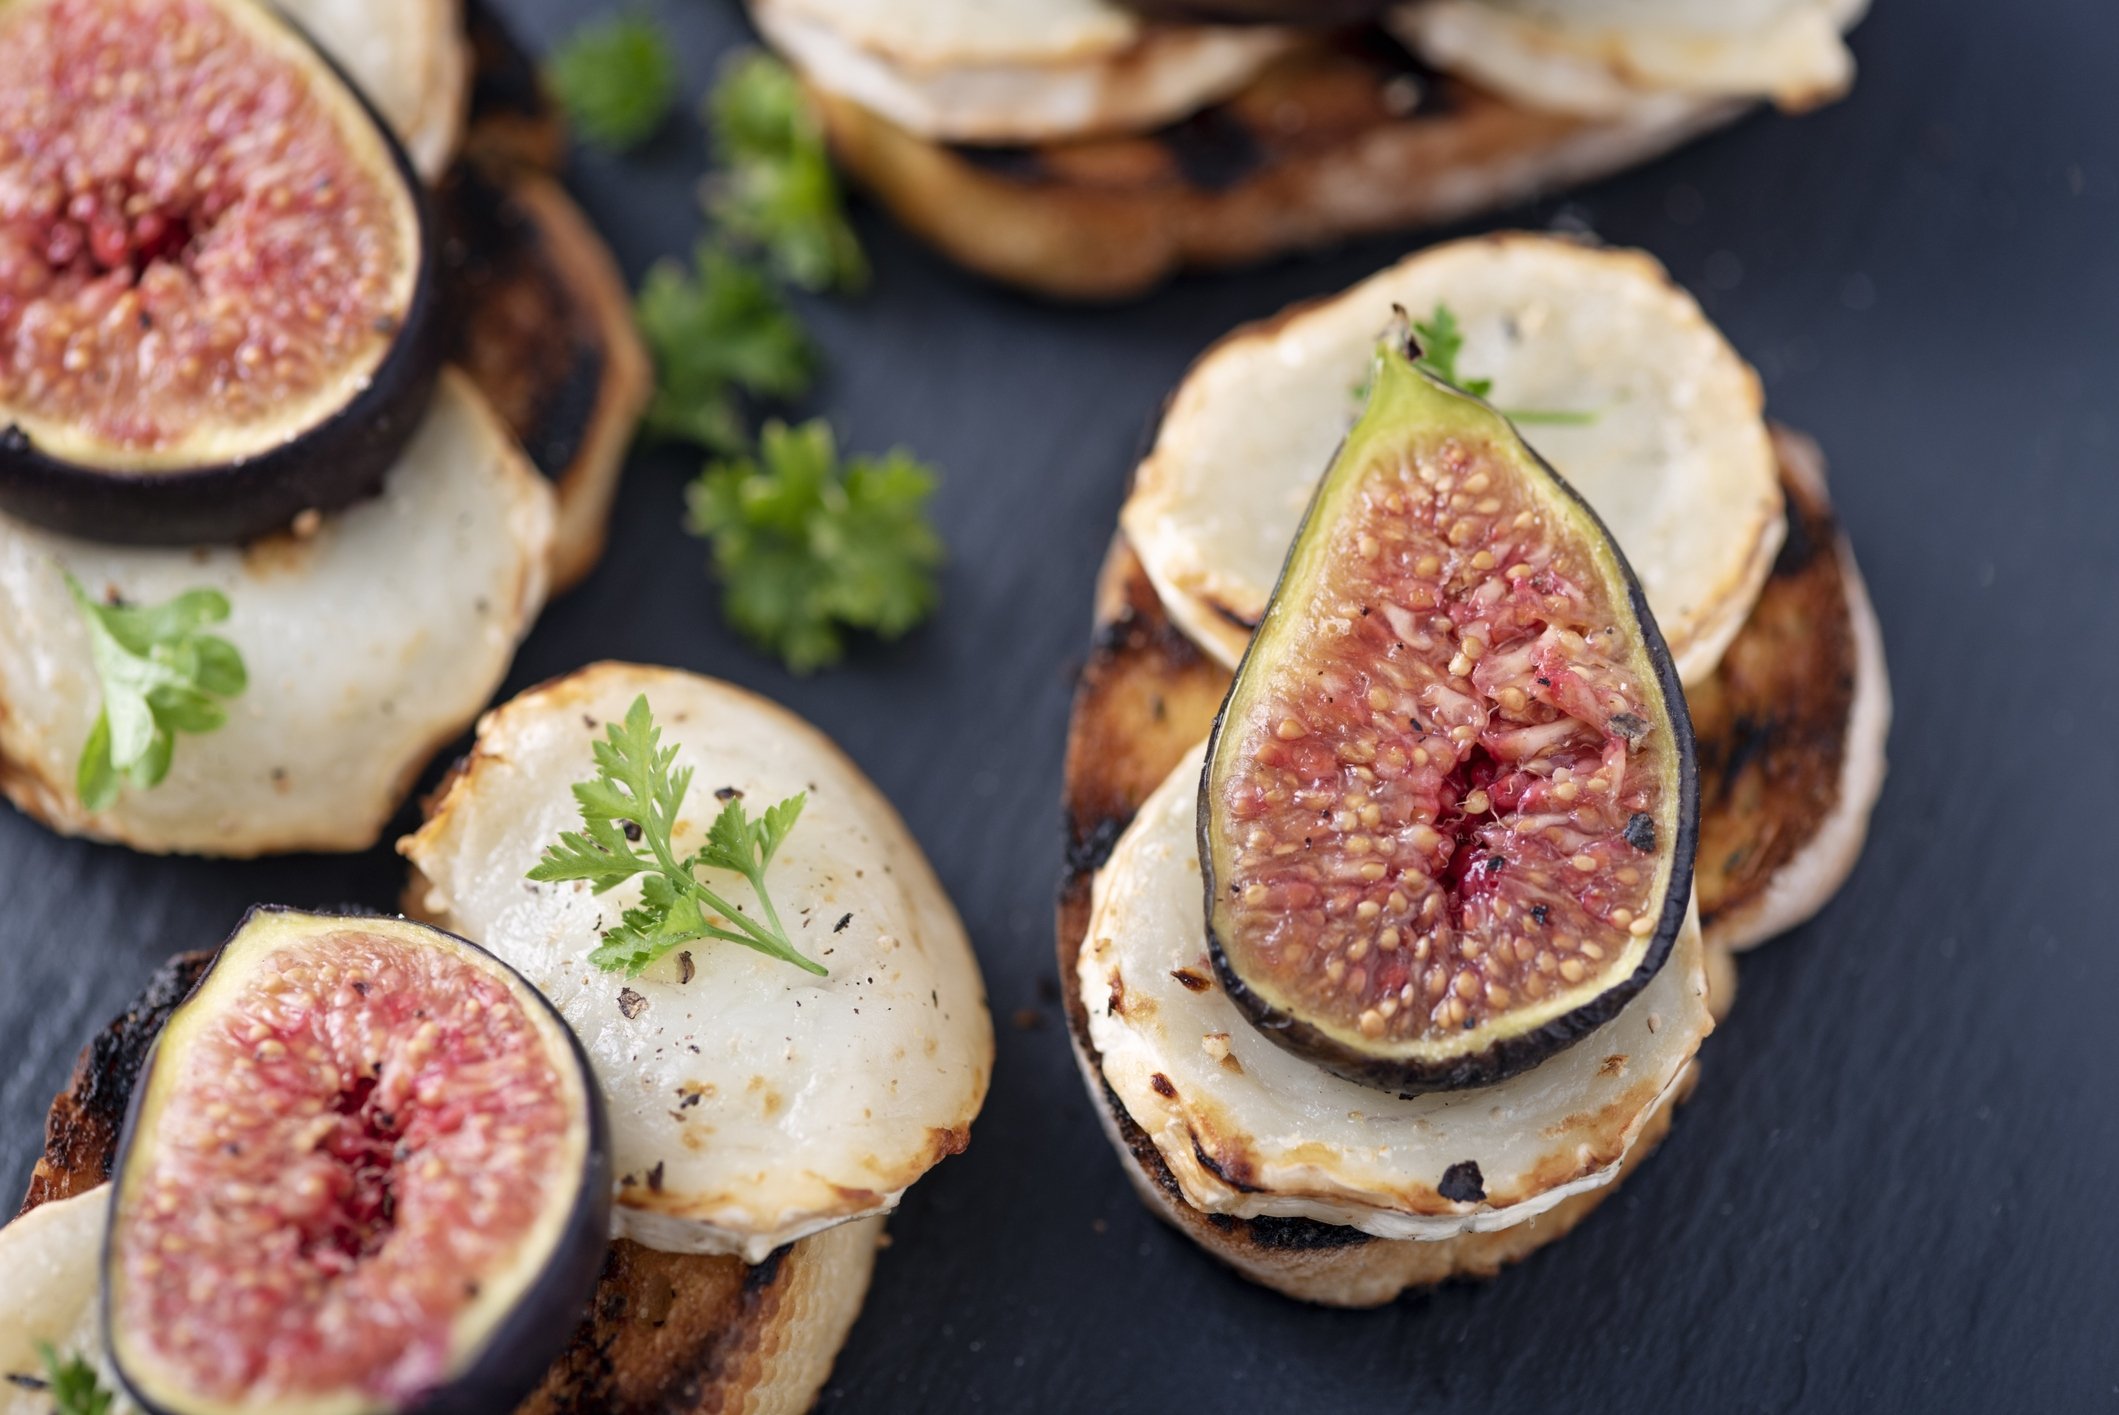 Slices of baguettes topped off with melted goat cheese and fig slices are great for fancy picnics. (iStock Photo)